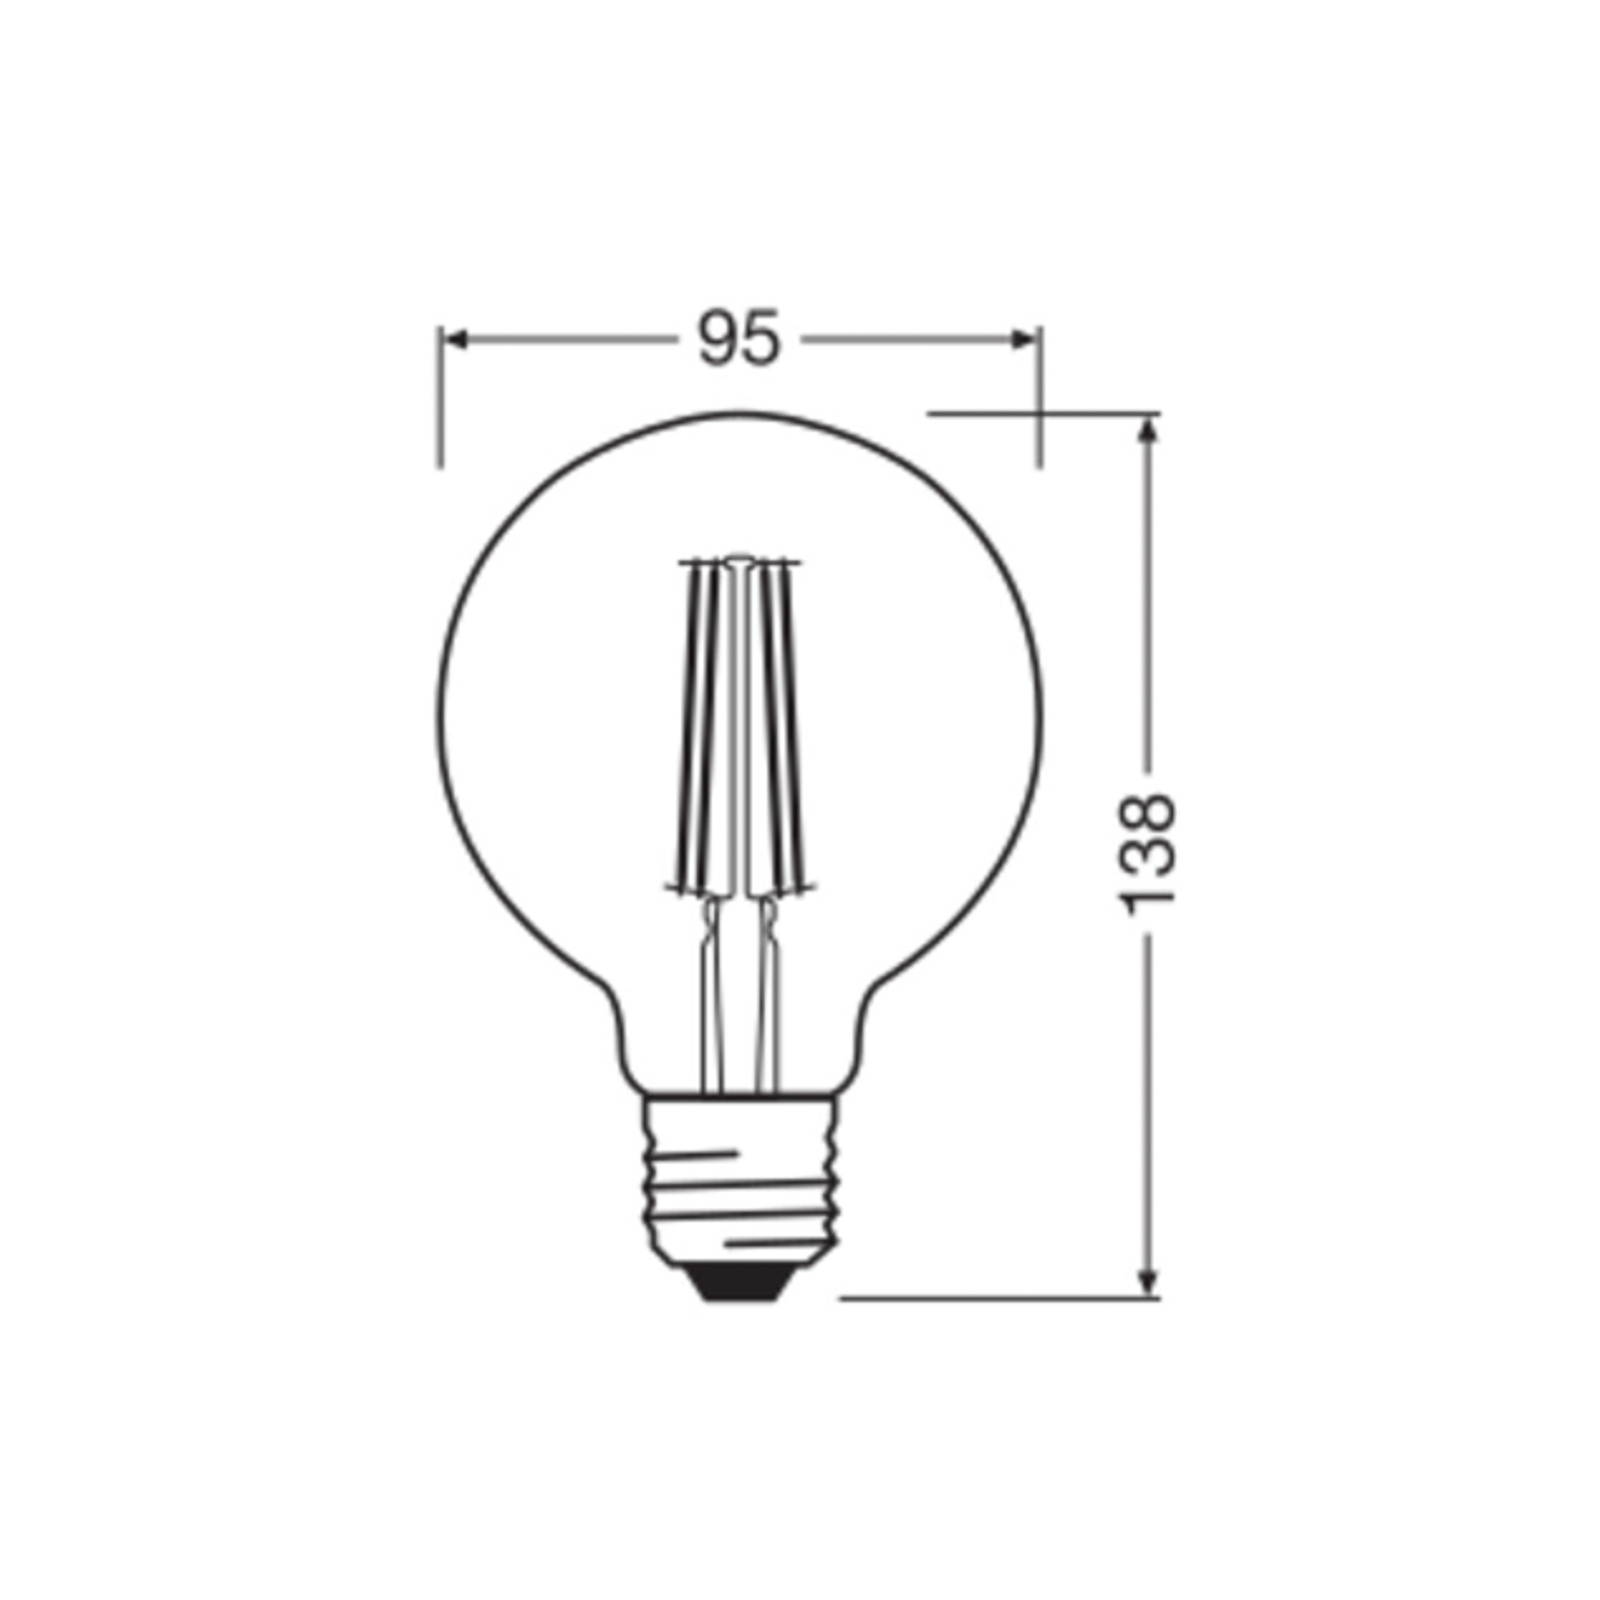 OSRAM LED Vintage 1906, G95, E27, 6.5 W, gold, 2,400 K, dimmable.